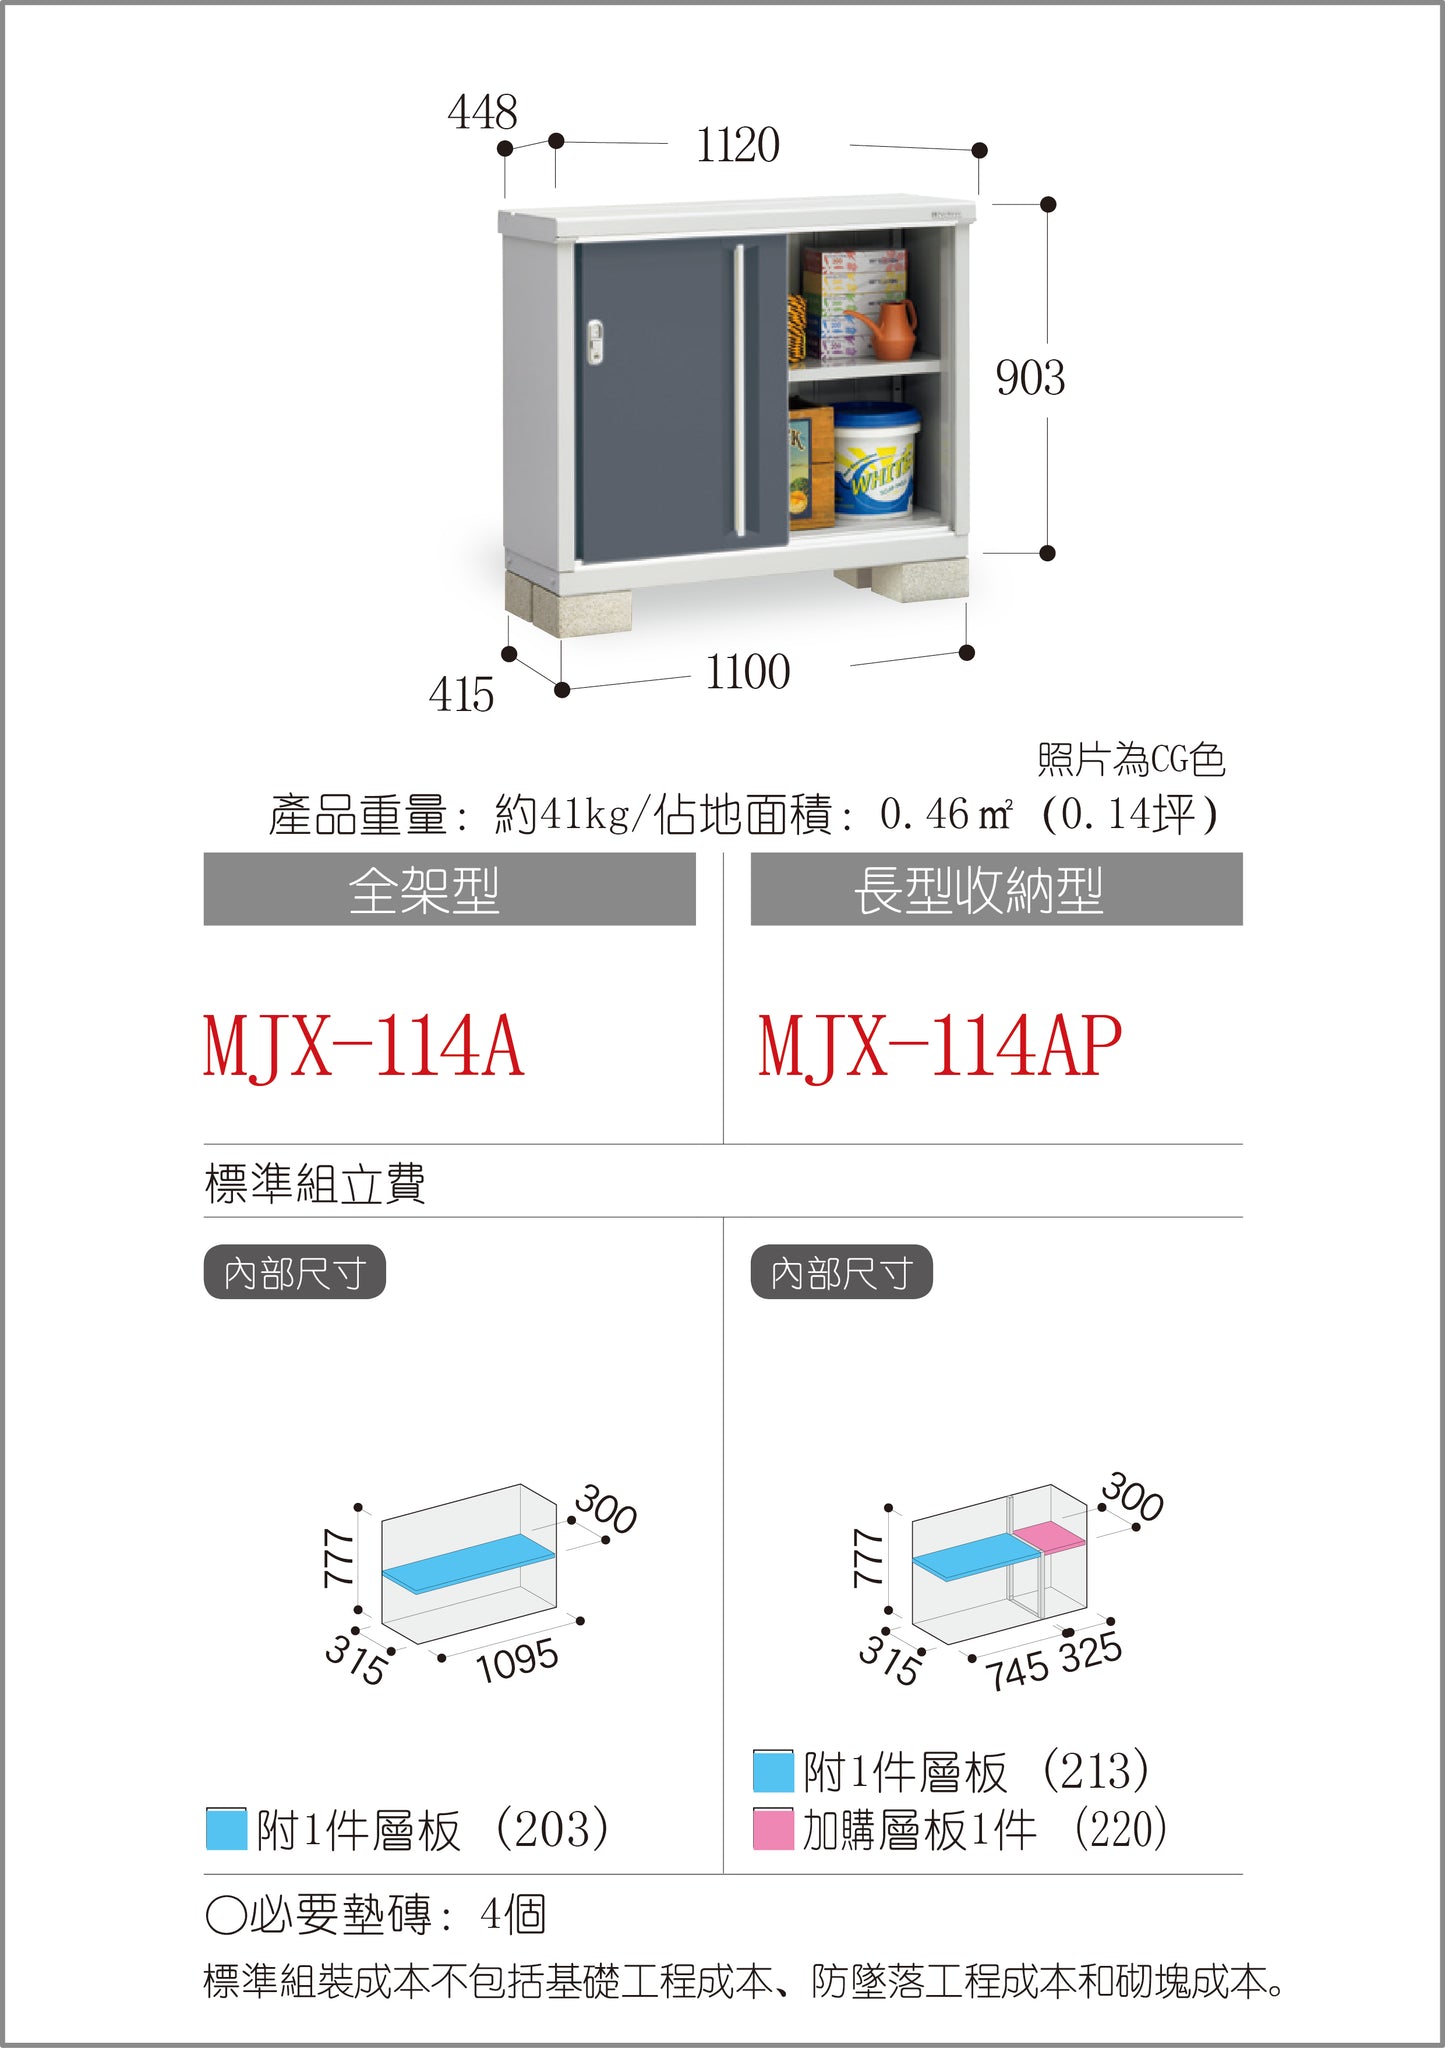 *Pre-order* Inaba Outdoor Storage MJX-114A (W1120xD448xH903mm) 0.453m3